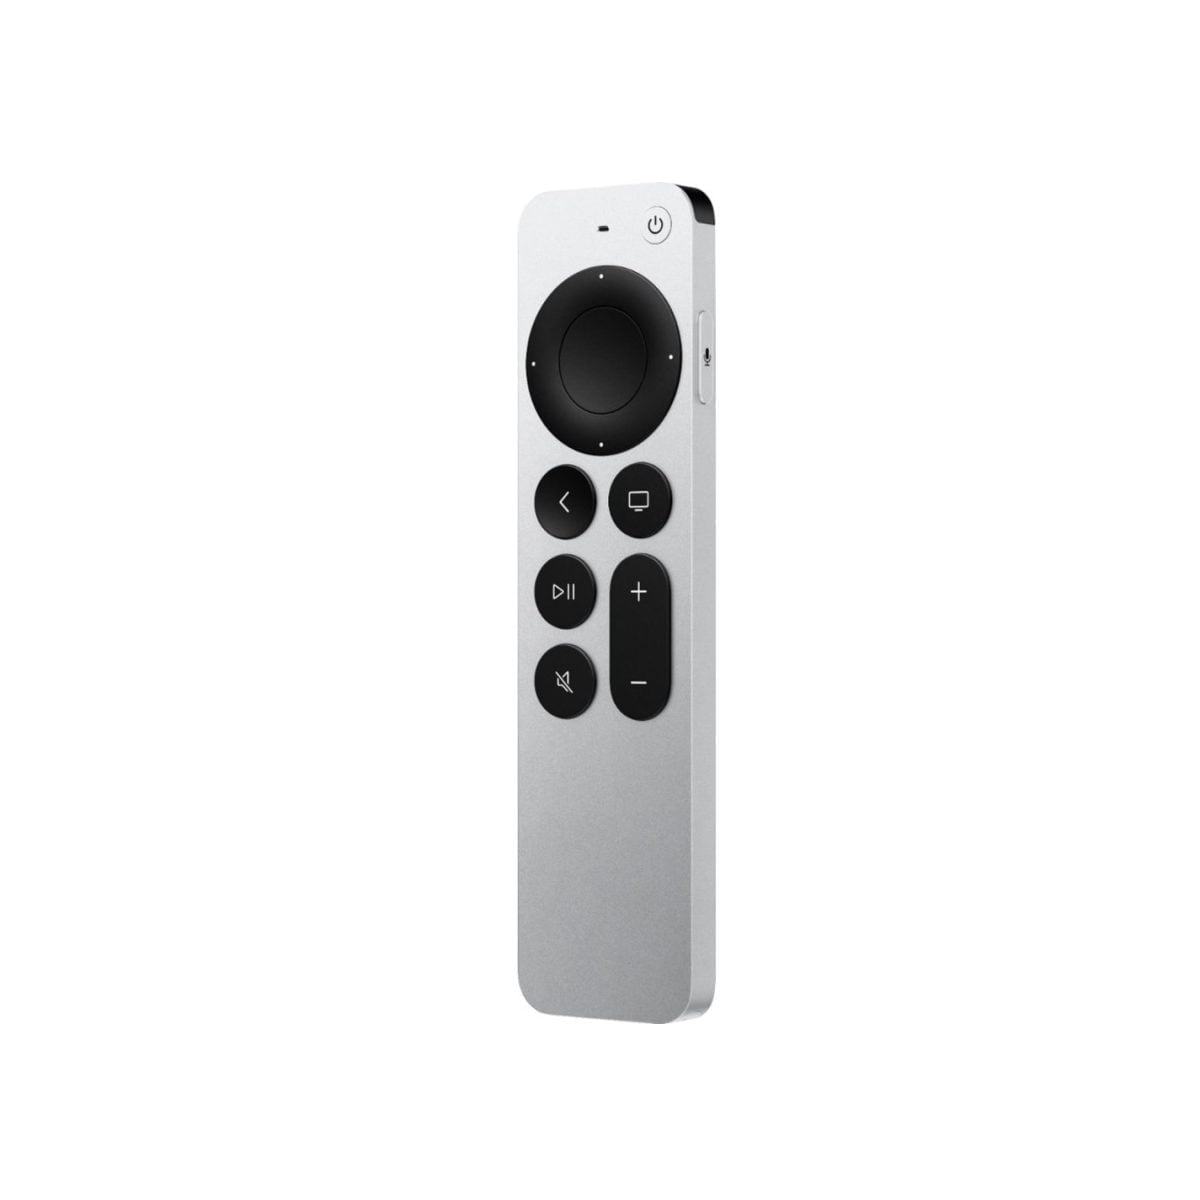 6342364Cv13D 1 Apple &Lt;H1&Gt;Apple Tv 4K 32Gb (2Nd Generation) (Latest Model 2021) - Black&Lt;/H1&Gt; &Lt;Div Class=&Quot;Long-Description-Container Body-Copy &Quot;&Gt; &Lt;Div Class=&Quot;Html-Fragment&Quot;&Gt; &Lt;Div&Gt; &Lt;Div&Gt;The New Apple Tv 4K Brings The Best Shows, Movies, Sports, And Live Tv-Together With Your Favorite Apple Devices And Services. Now With 4K High Frame Rate Hdr For Fluid, Crisp Video. Watch Apple Originals With Apple Tv+. Experience More Ways To Enjoy Your Tv With Apple Arcade, Apple Fitness+, And Apple Music. And Use The New Siri Remote With Touch-Enabled Clickpad To Control It All.&Lt;/Div&Gt; &Lt;/Div&Gt; &Lt;/Div&Gt; &Lt;/Div&Gt; Apple Tv 4K 32Gb Apple Tv 4K 32Gb -2021- Black